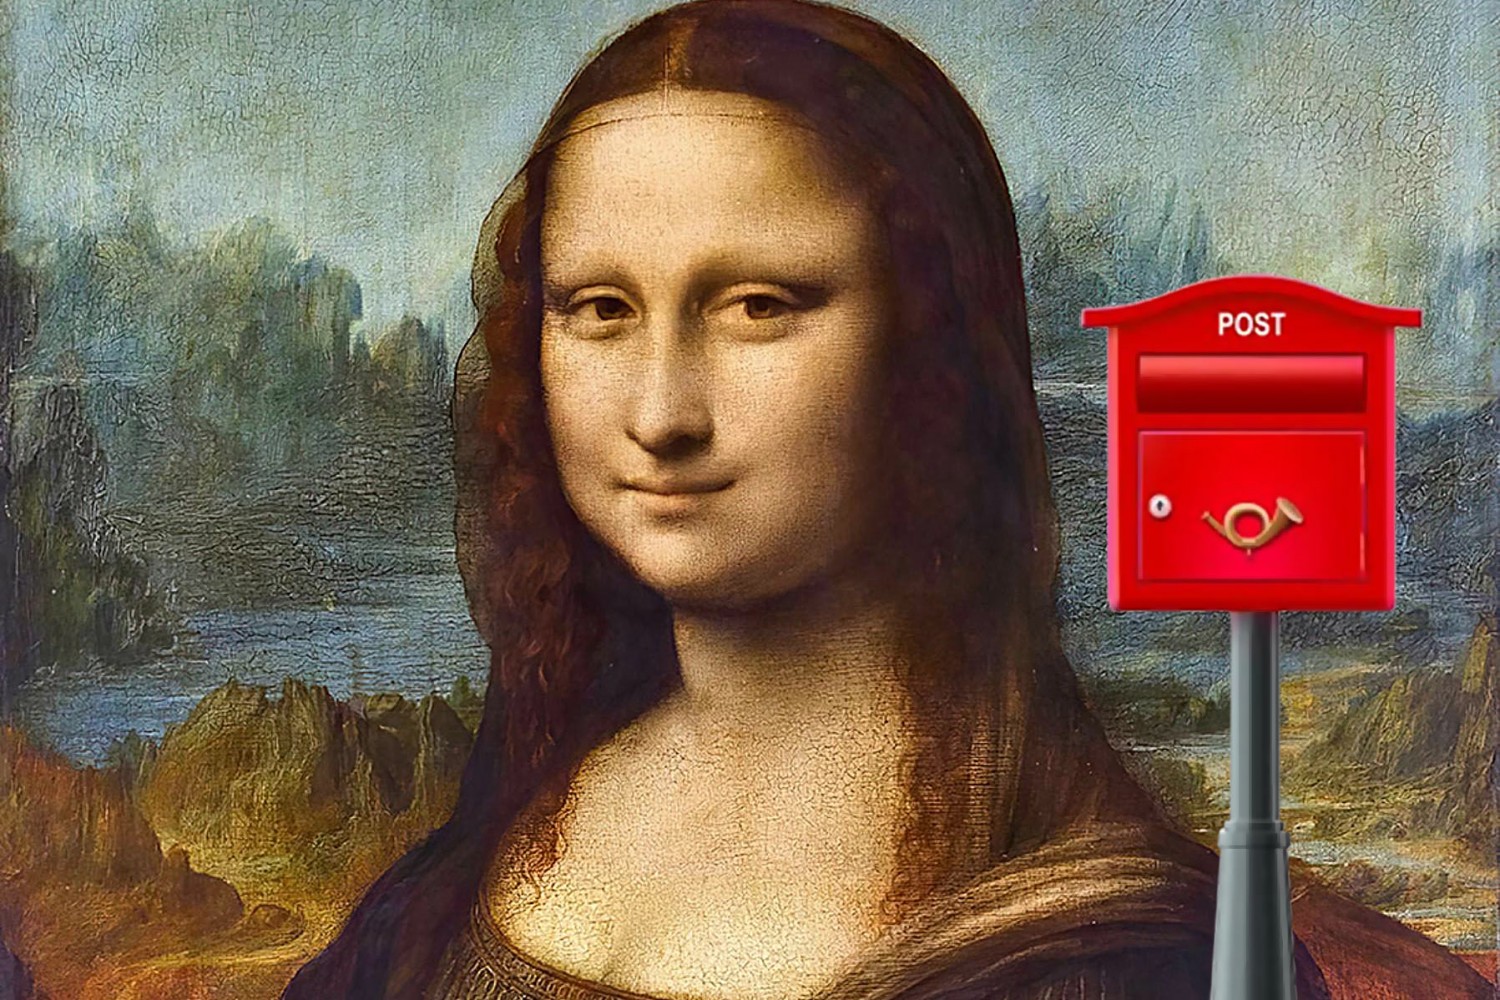 Mona Lisa's Own Mailbox and 5 Incredible Facts About Art